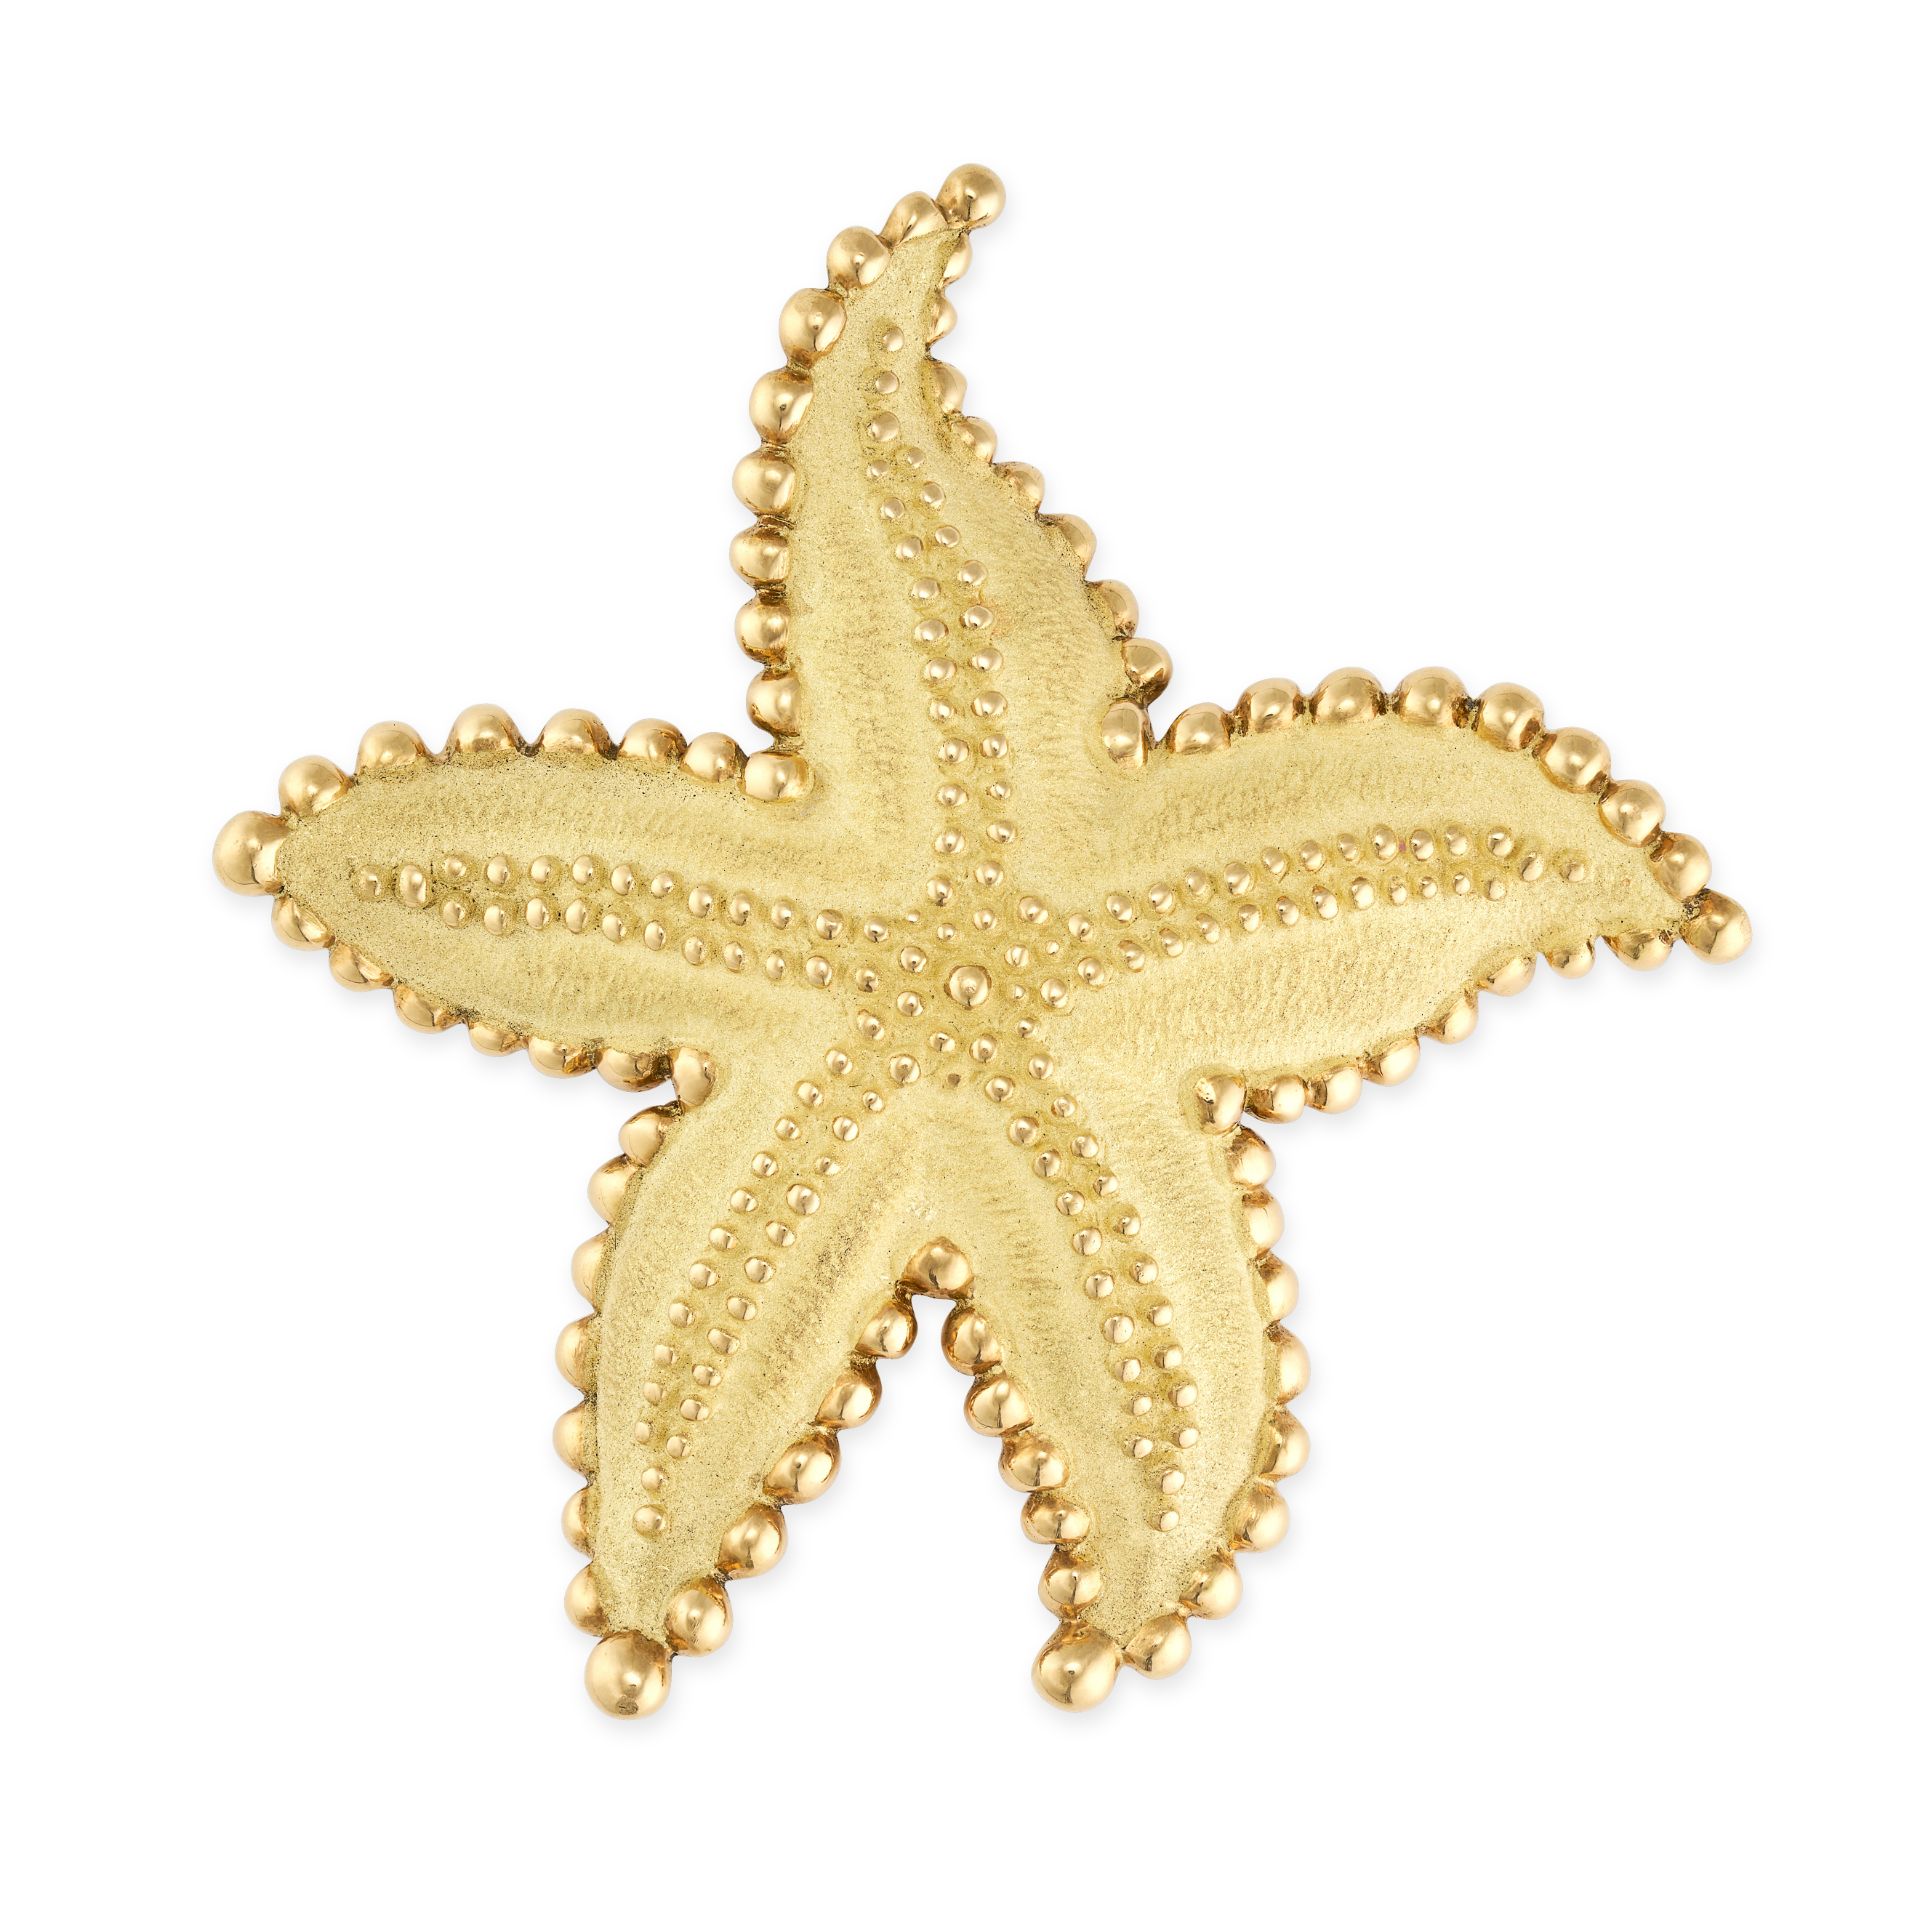 TIFFANY & CO., A VINTAGE STARFISH BROOCH, 1970S in 18ct yellow gold, designed as a textured starf...